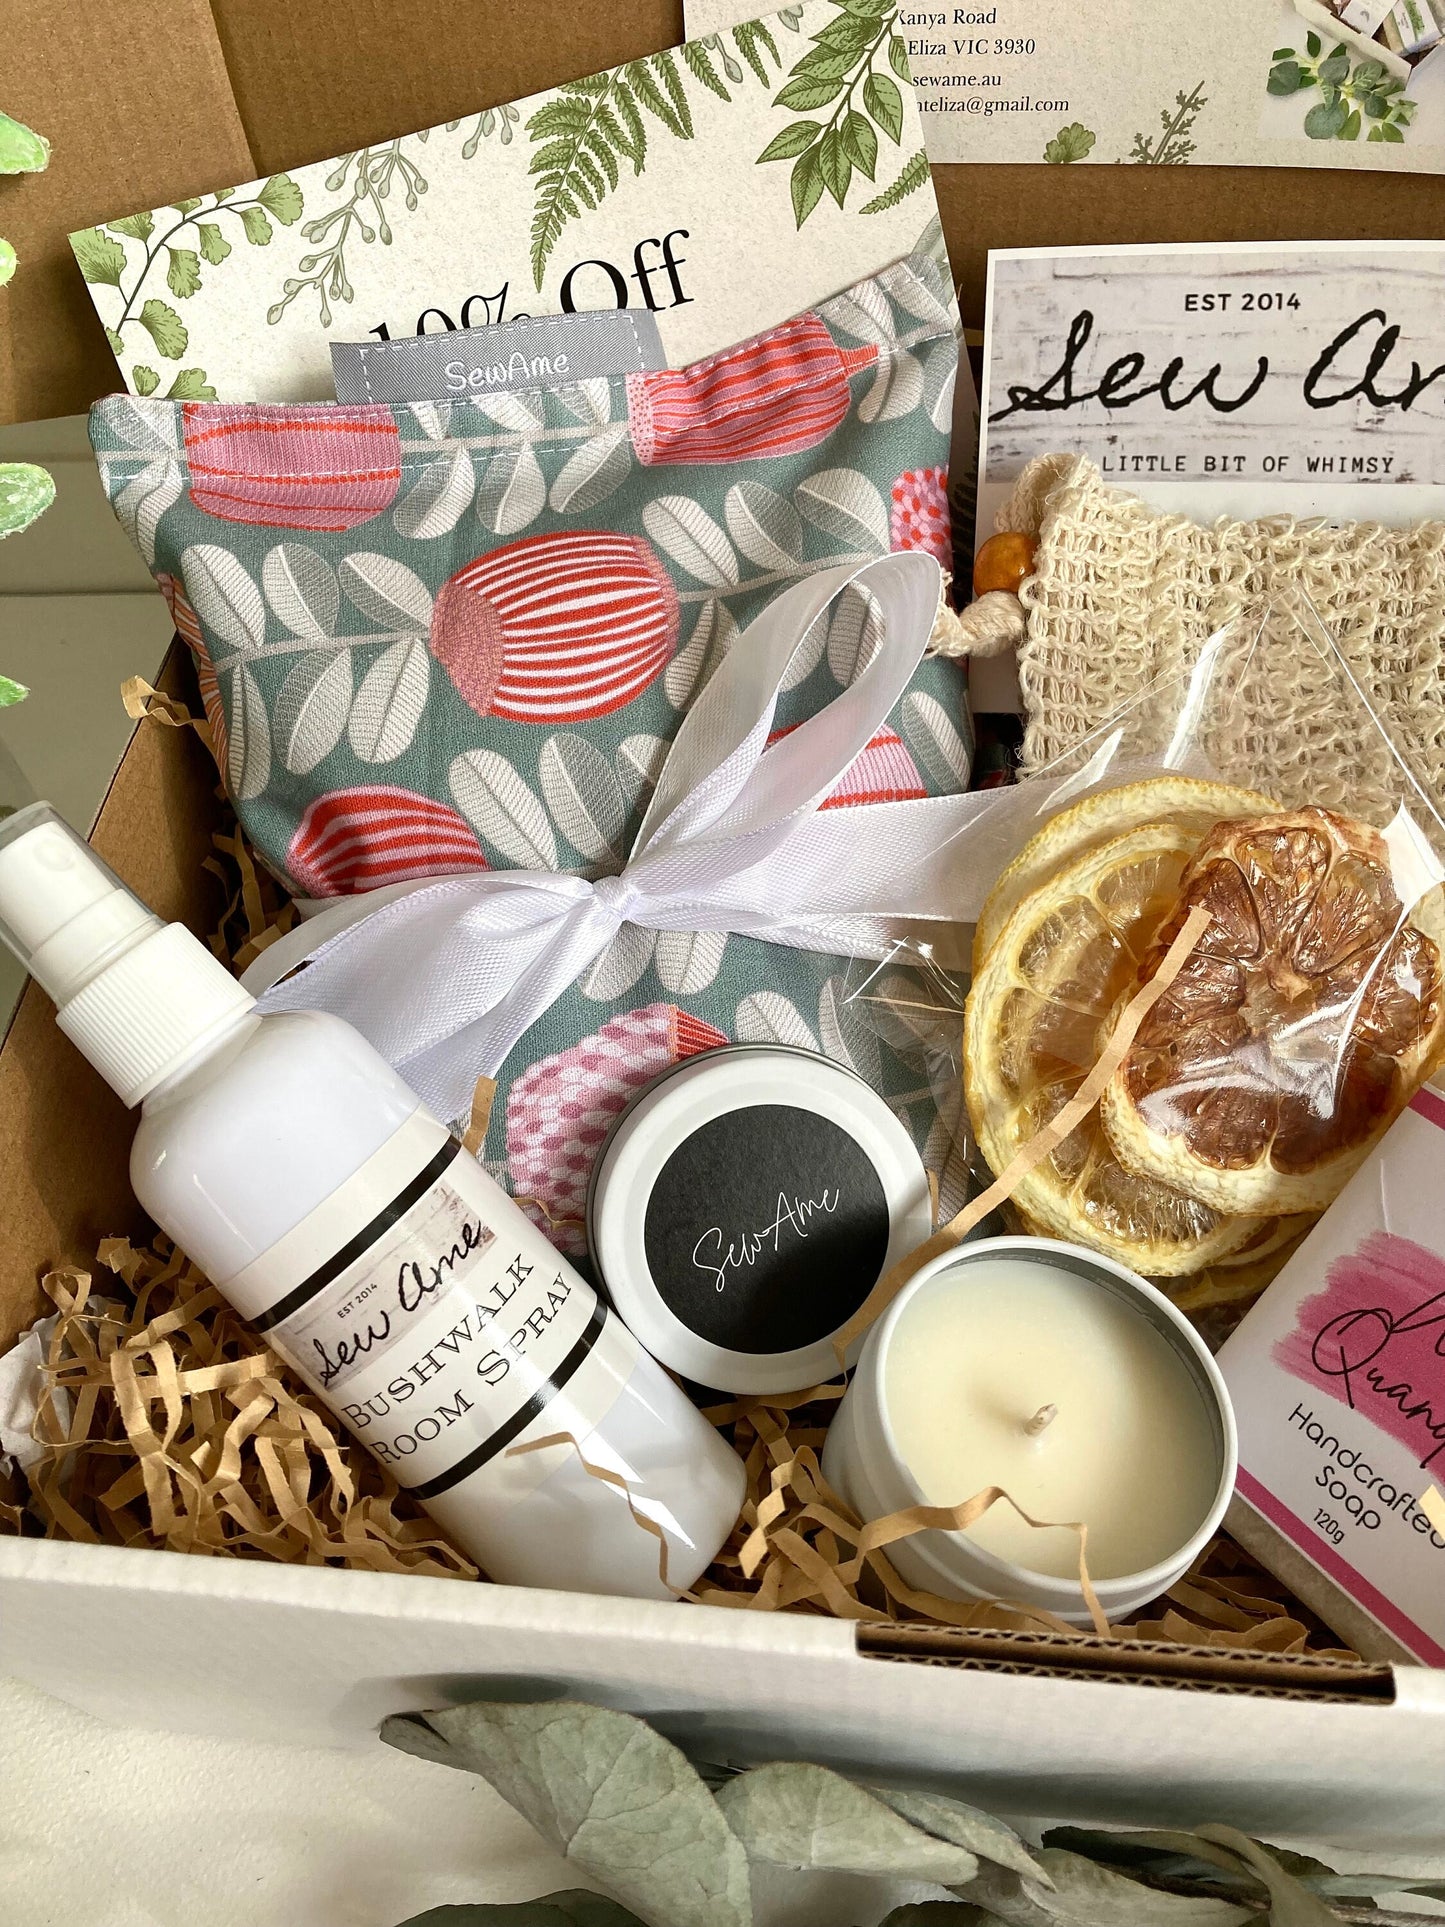 Personalised Hamper for Her,Beauty Pamper Hamper for Mum, Spa and Care Pack in Native Australian Flowers Fabric